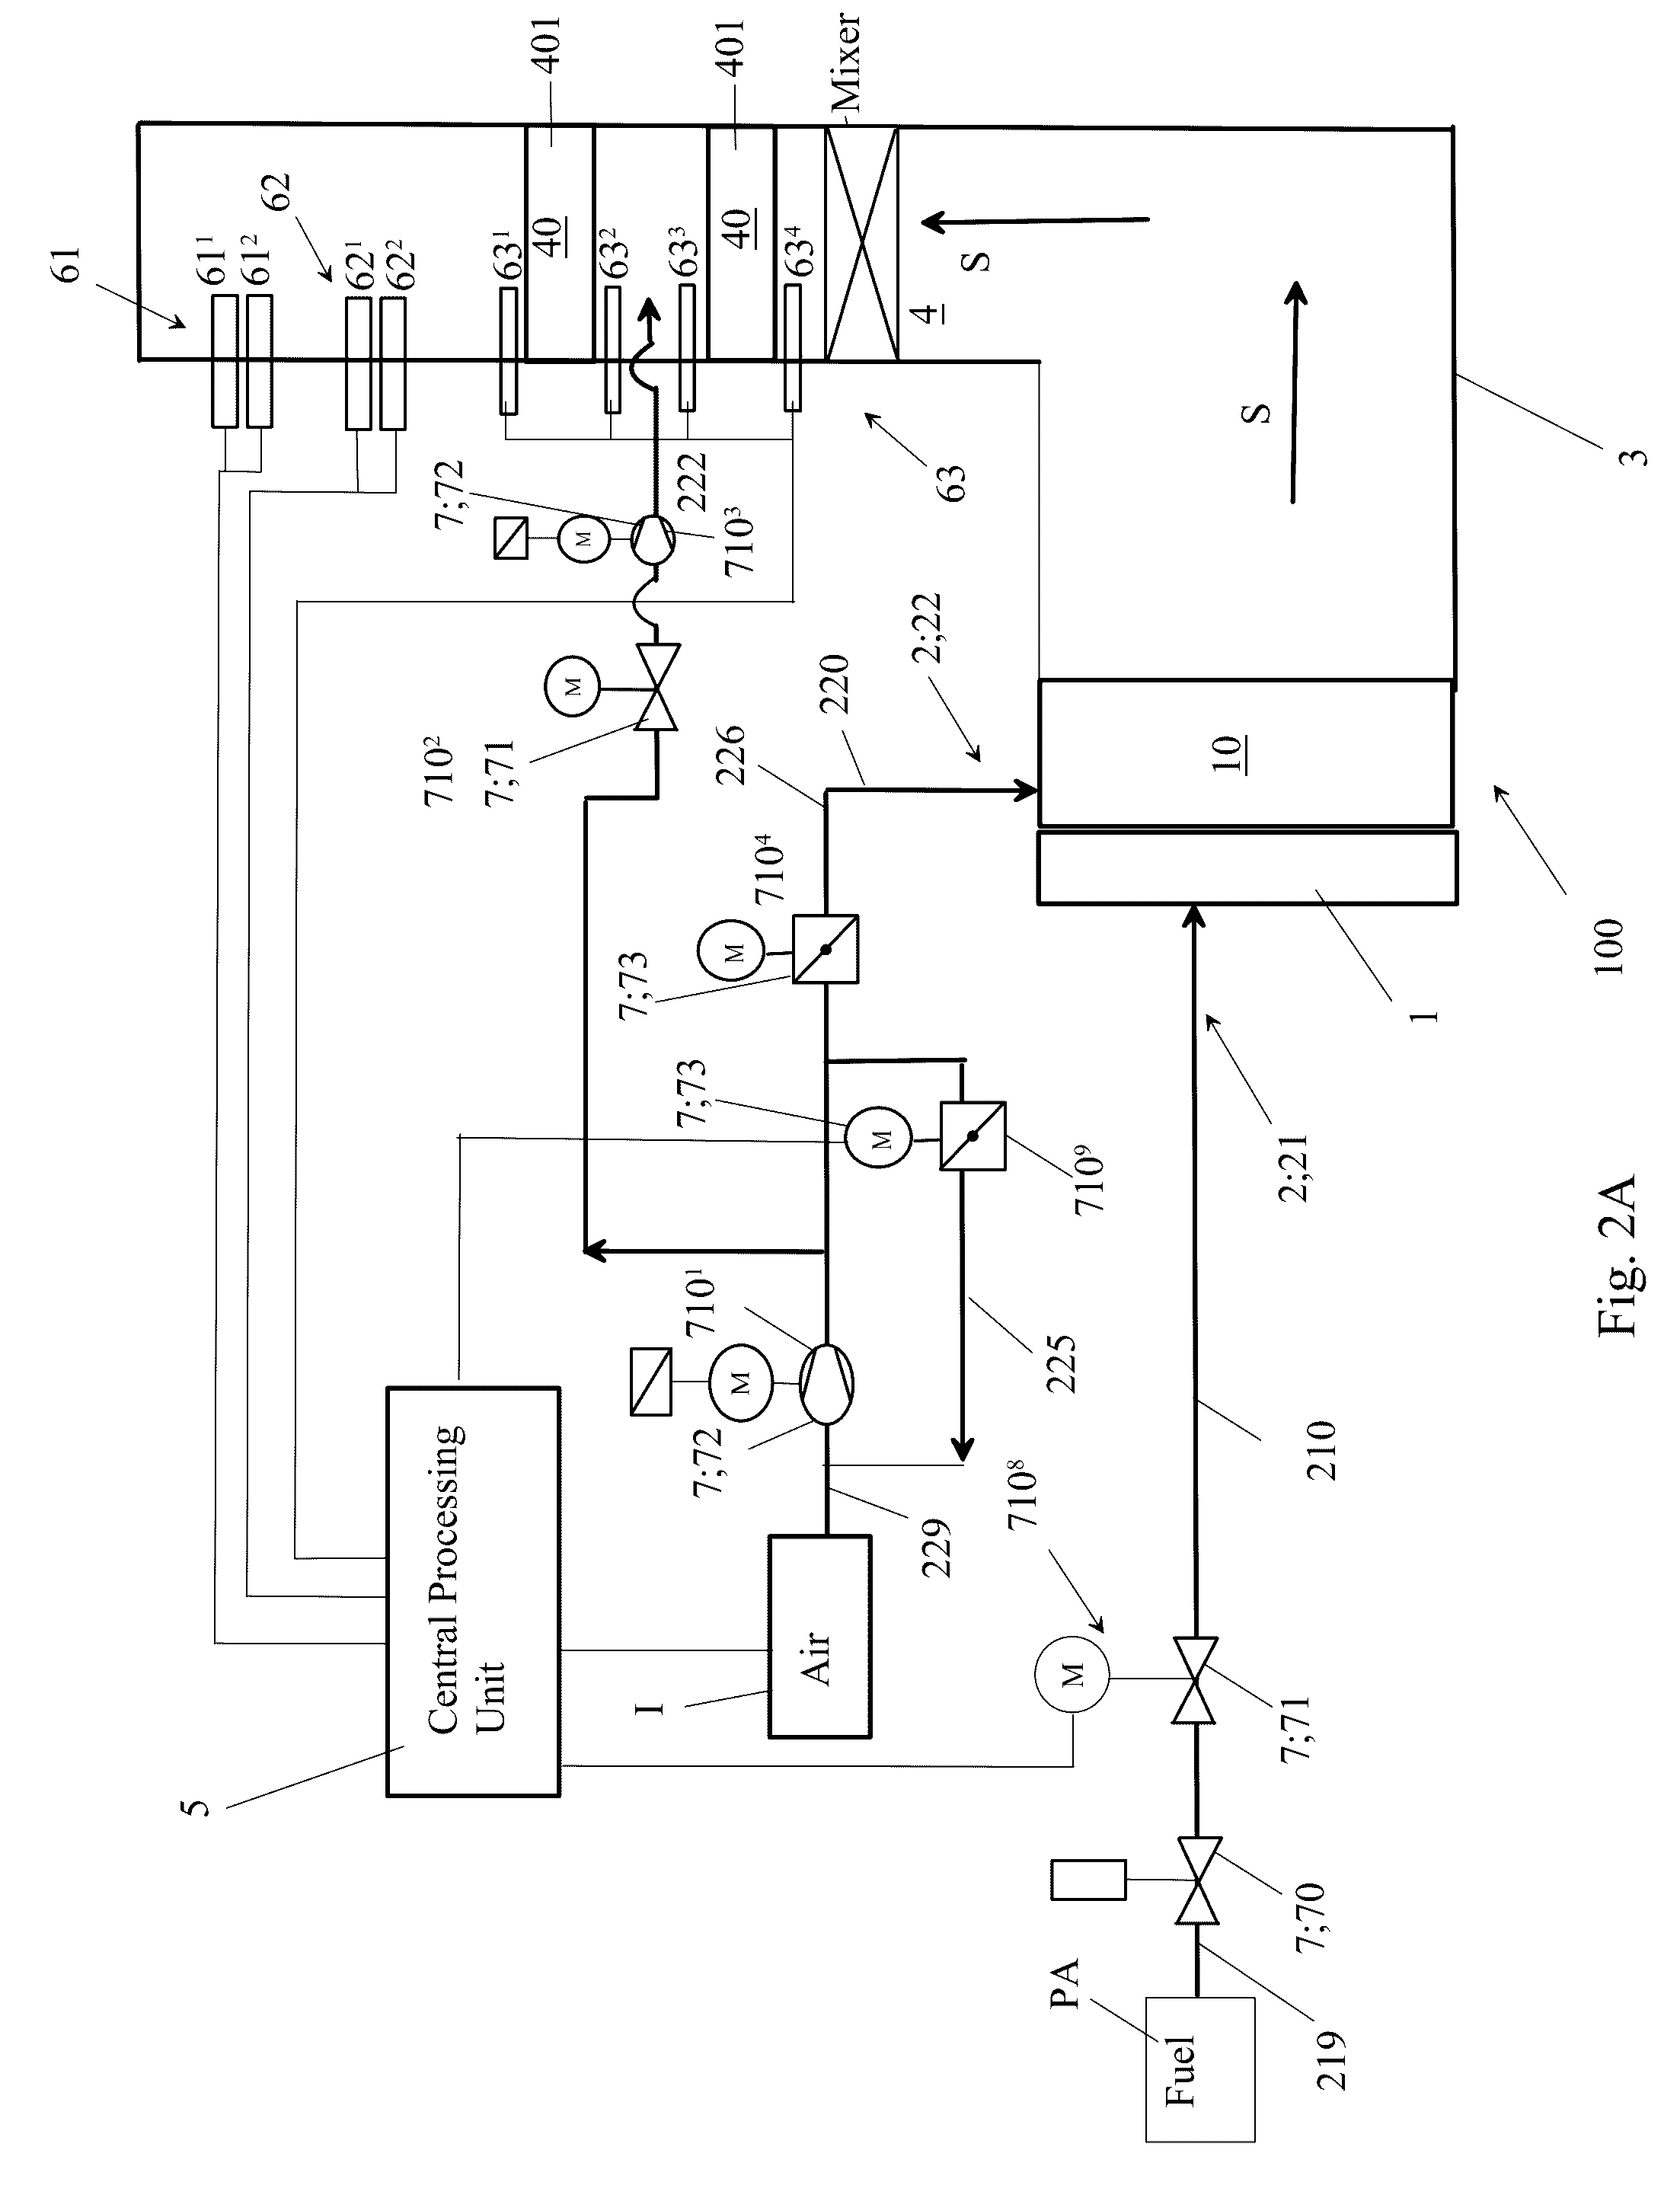 Method for reducing nitrogen oxide(s) and carbon monoxide from flue gases and flue gas composition